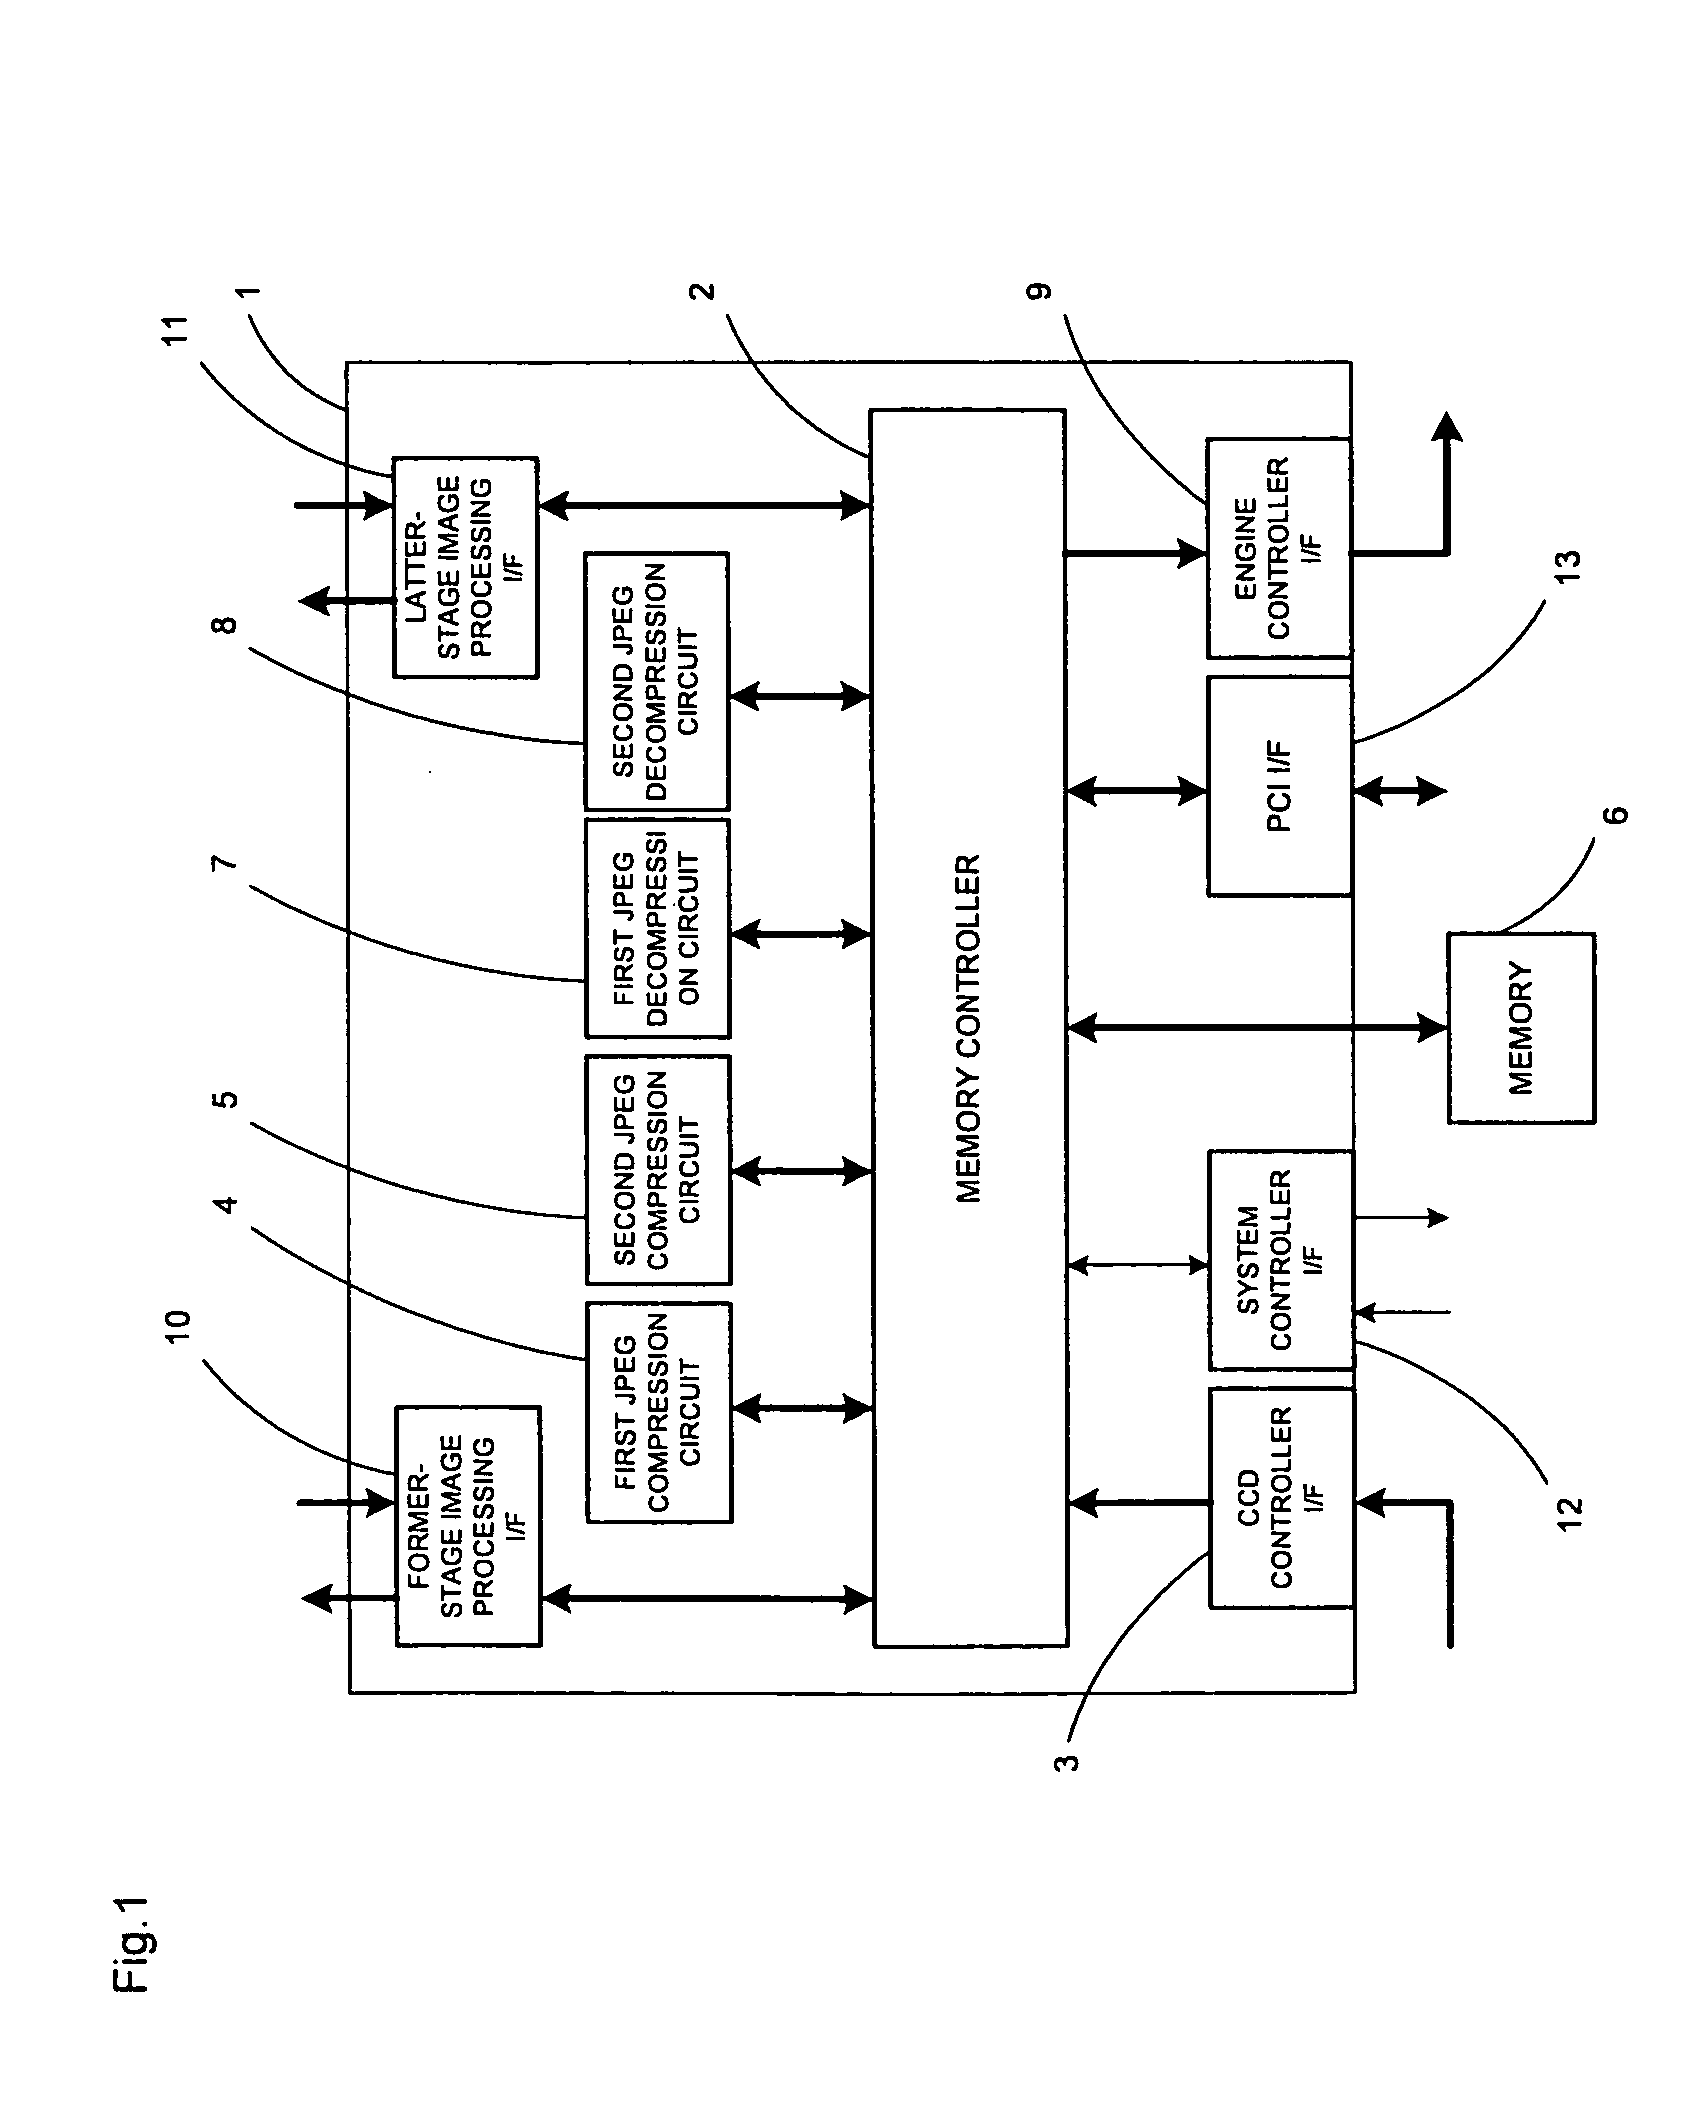 Image data processing circuit and image processing apparatus including the same